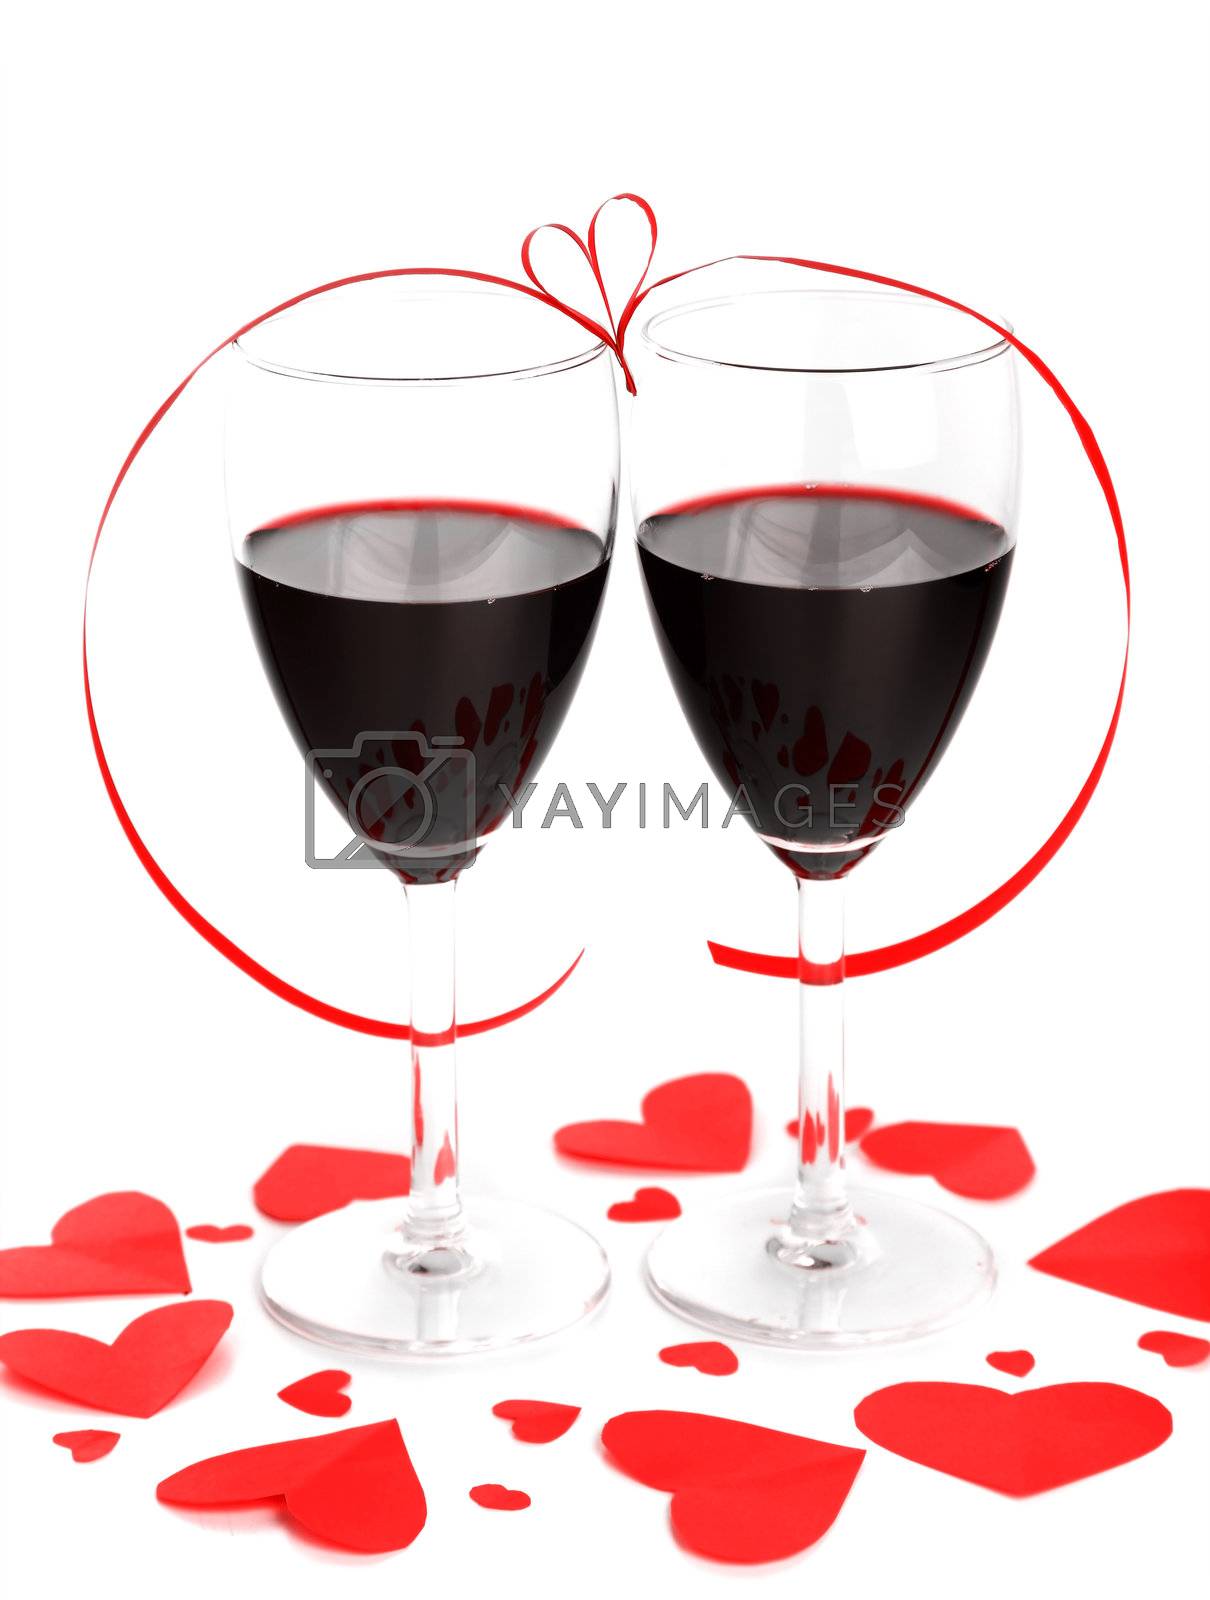 Romantic holiday drink, celebration of valentine's day, red wine with hearts ornament & ribbon decoration, isolated on white background